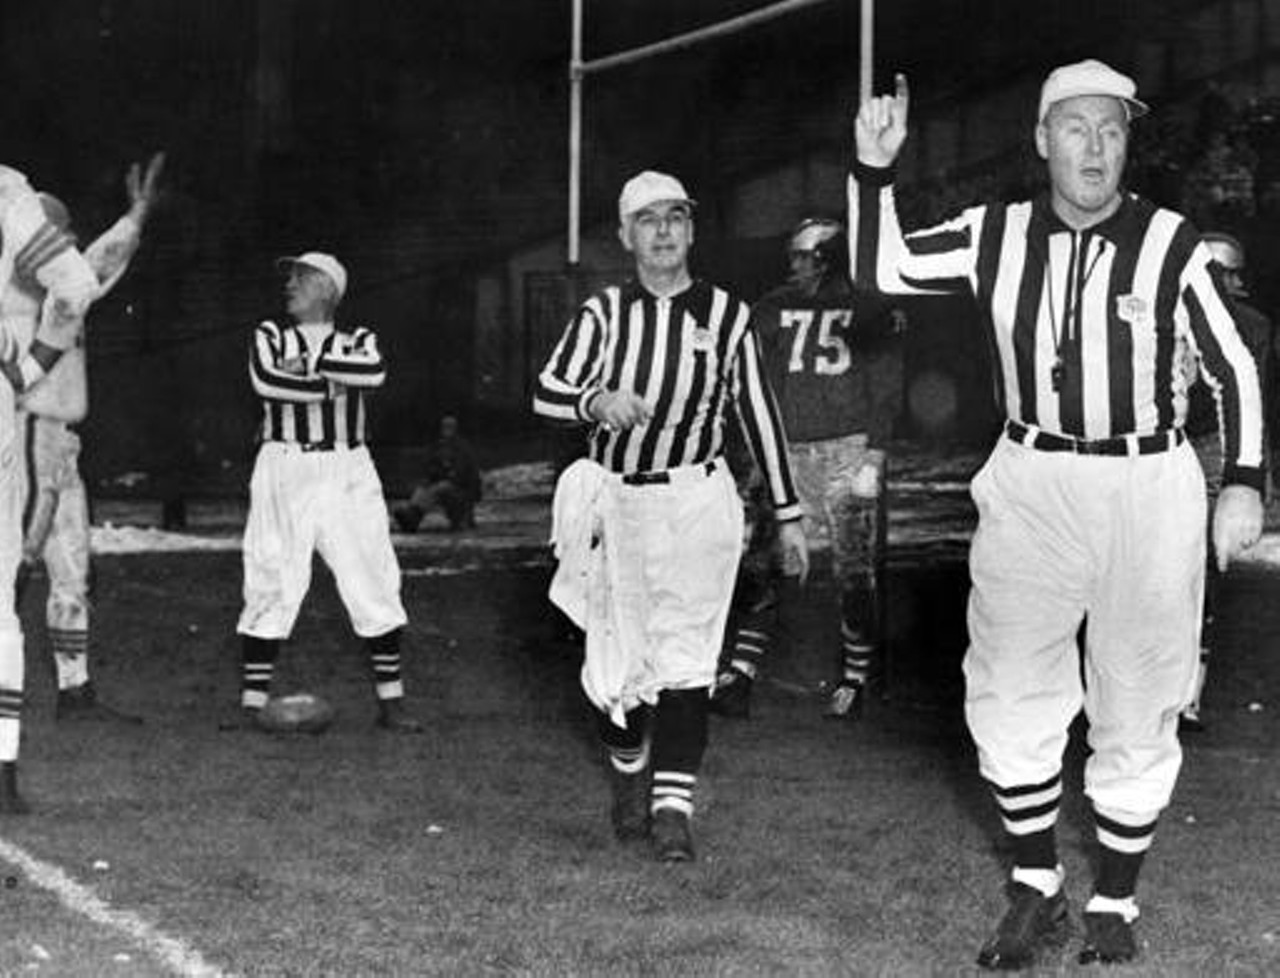 In 1956, the referees got mad at Browns fans for throwing snowballs. A far cry from the Tribe's 10-cent beer night two decades later.